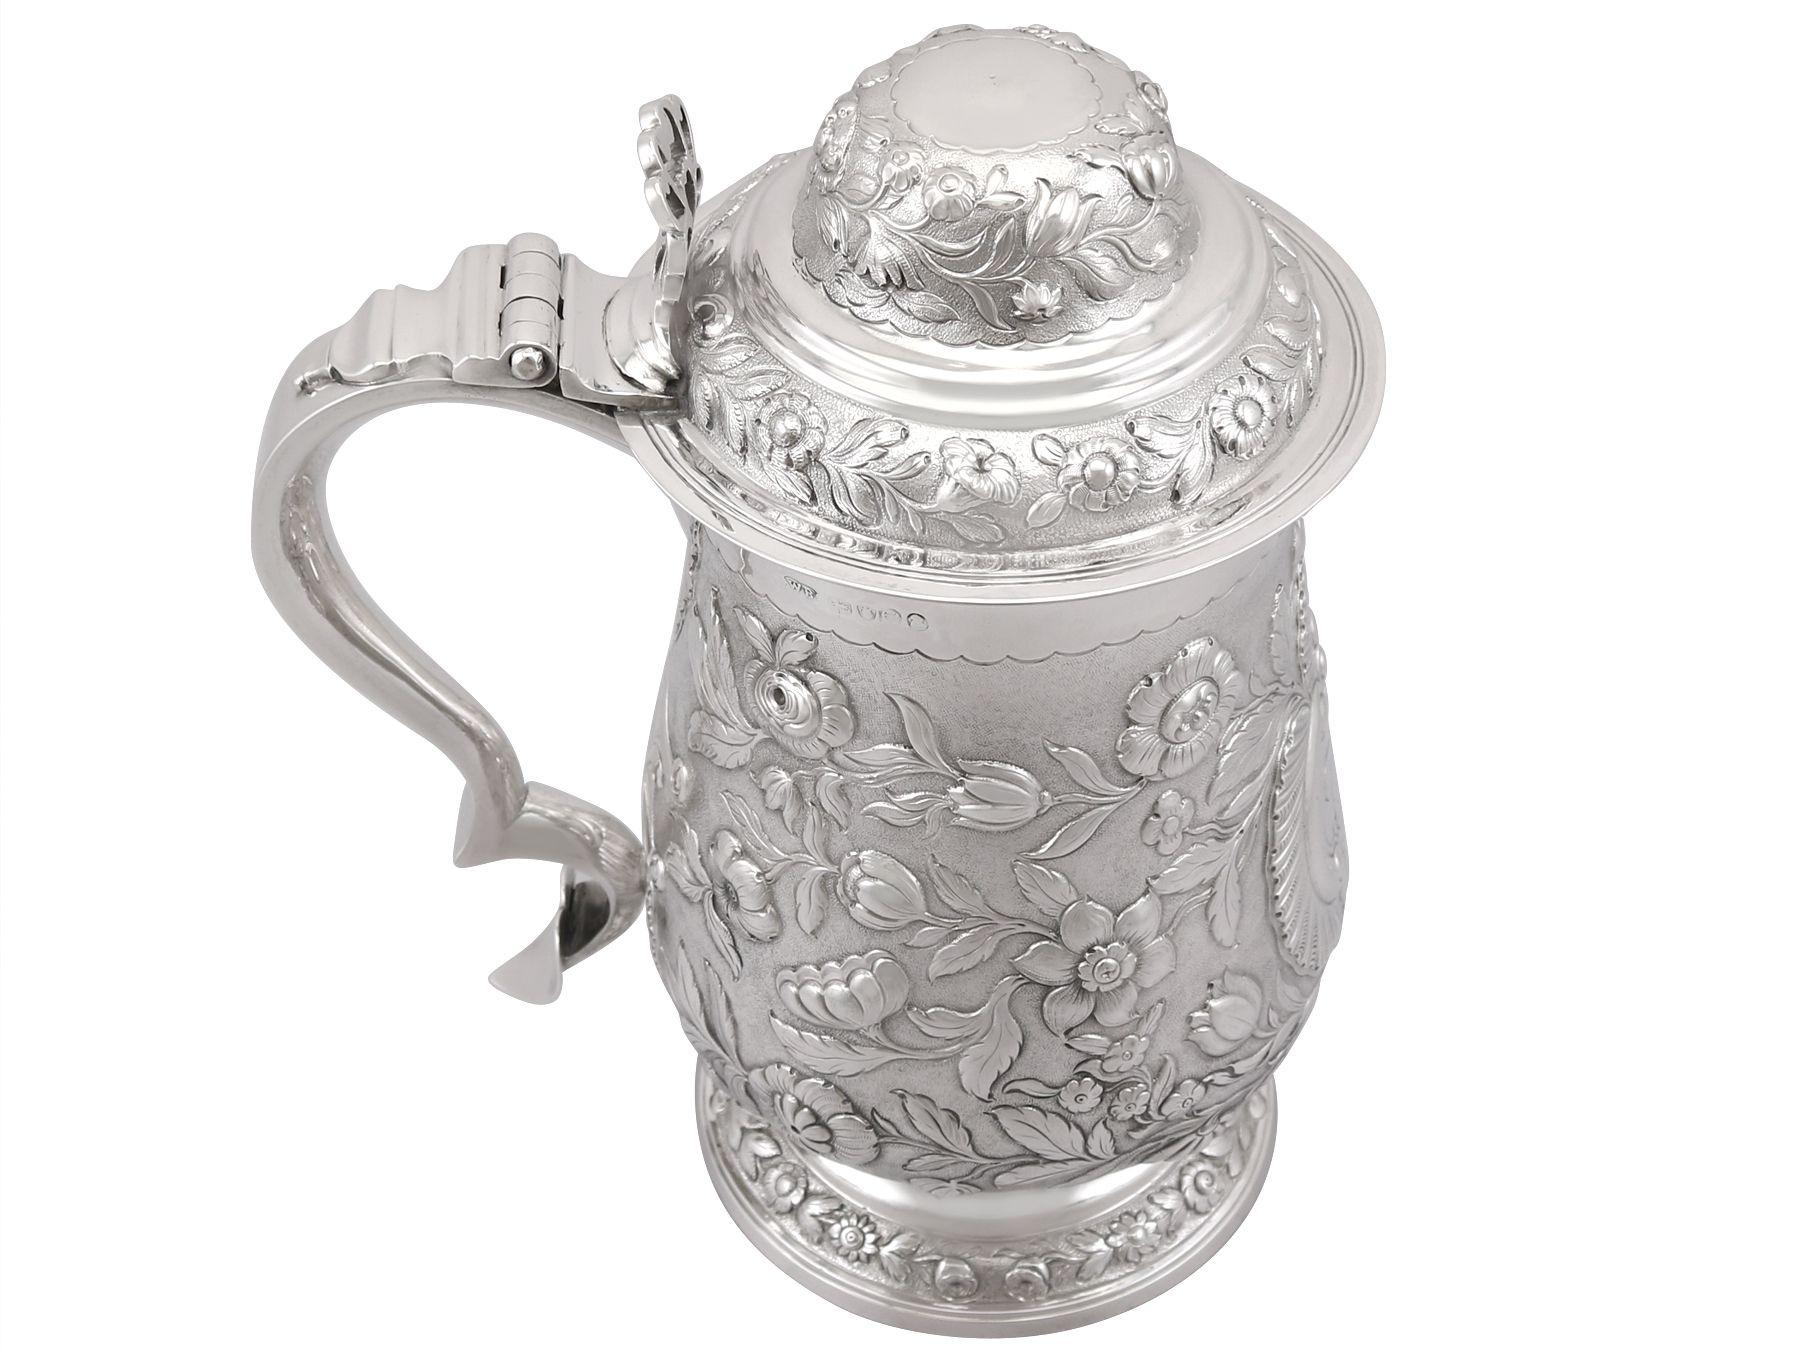 An exceptional, fine and impressive, large antique George IV English sterling silver quart and a half tankard made by William Bateman I; an addition to our silver tankard collection.

This exceptional antique George IV sterling silver tankard has